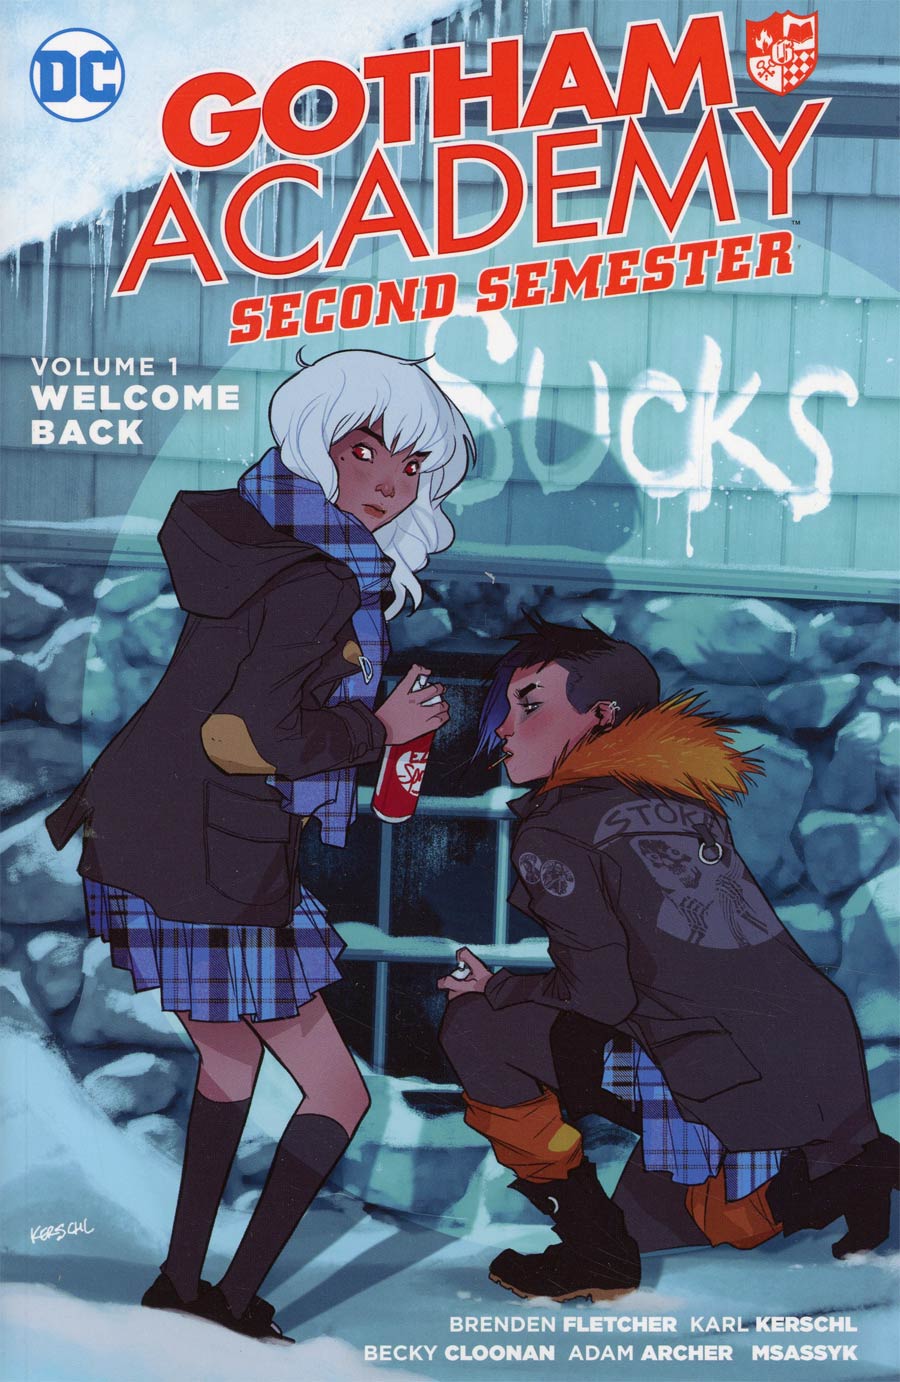 Gotham Academy Second Semester Vol 1 Welcome Back TP